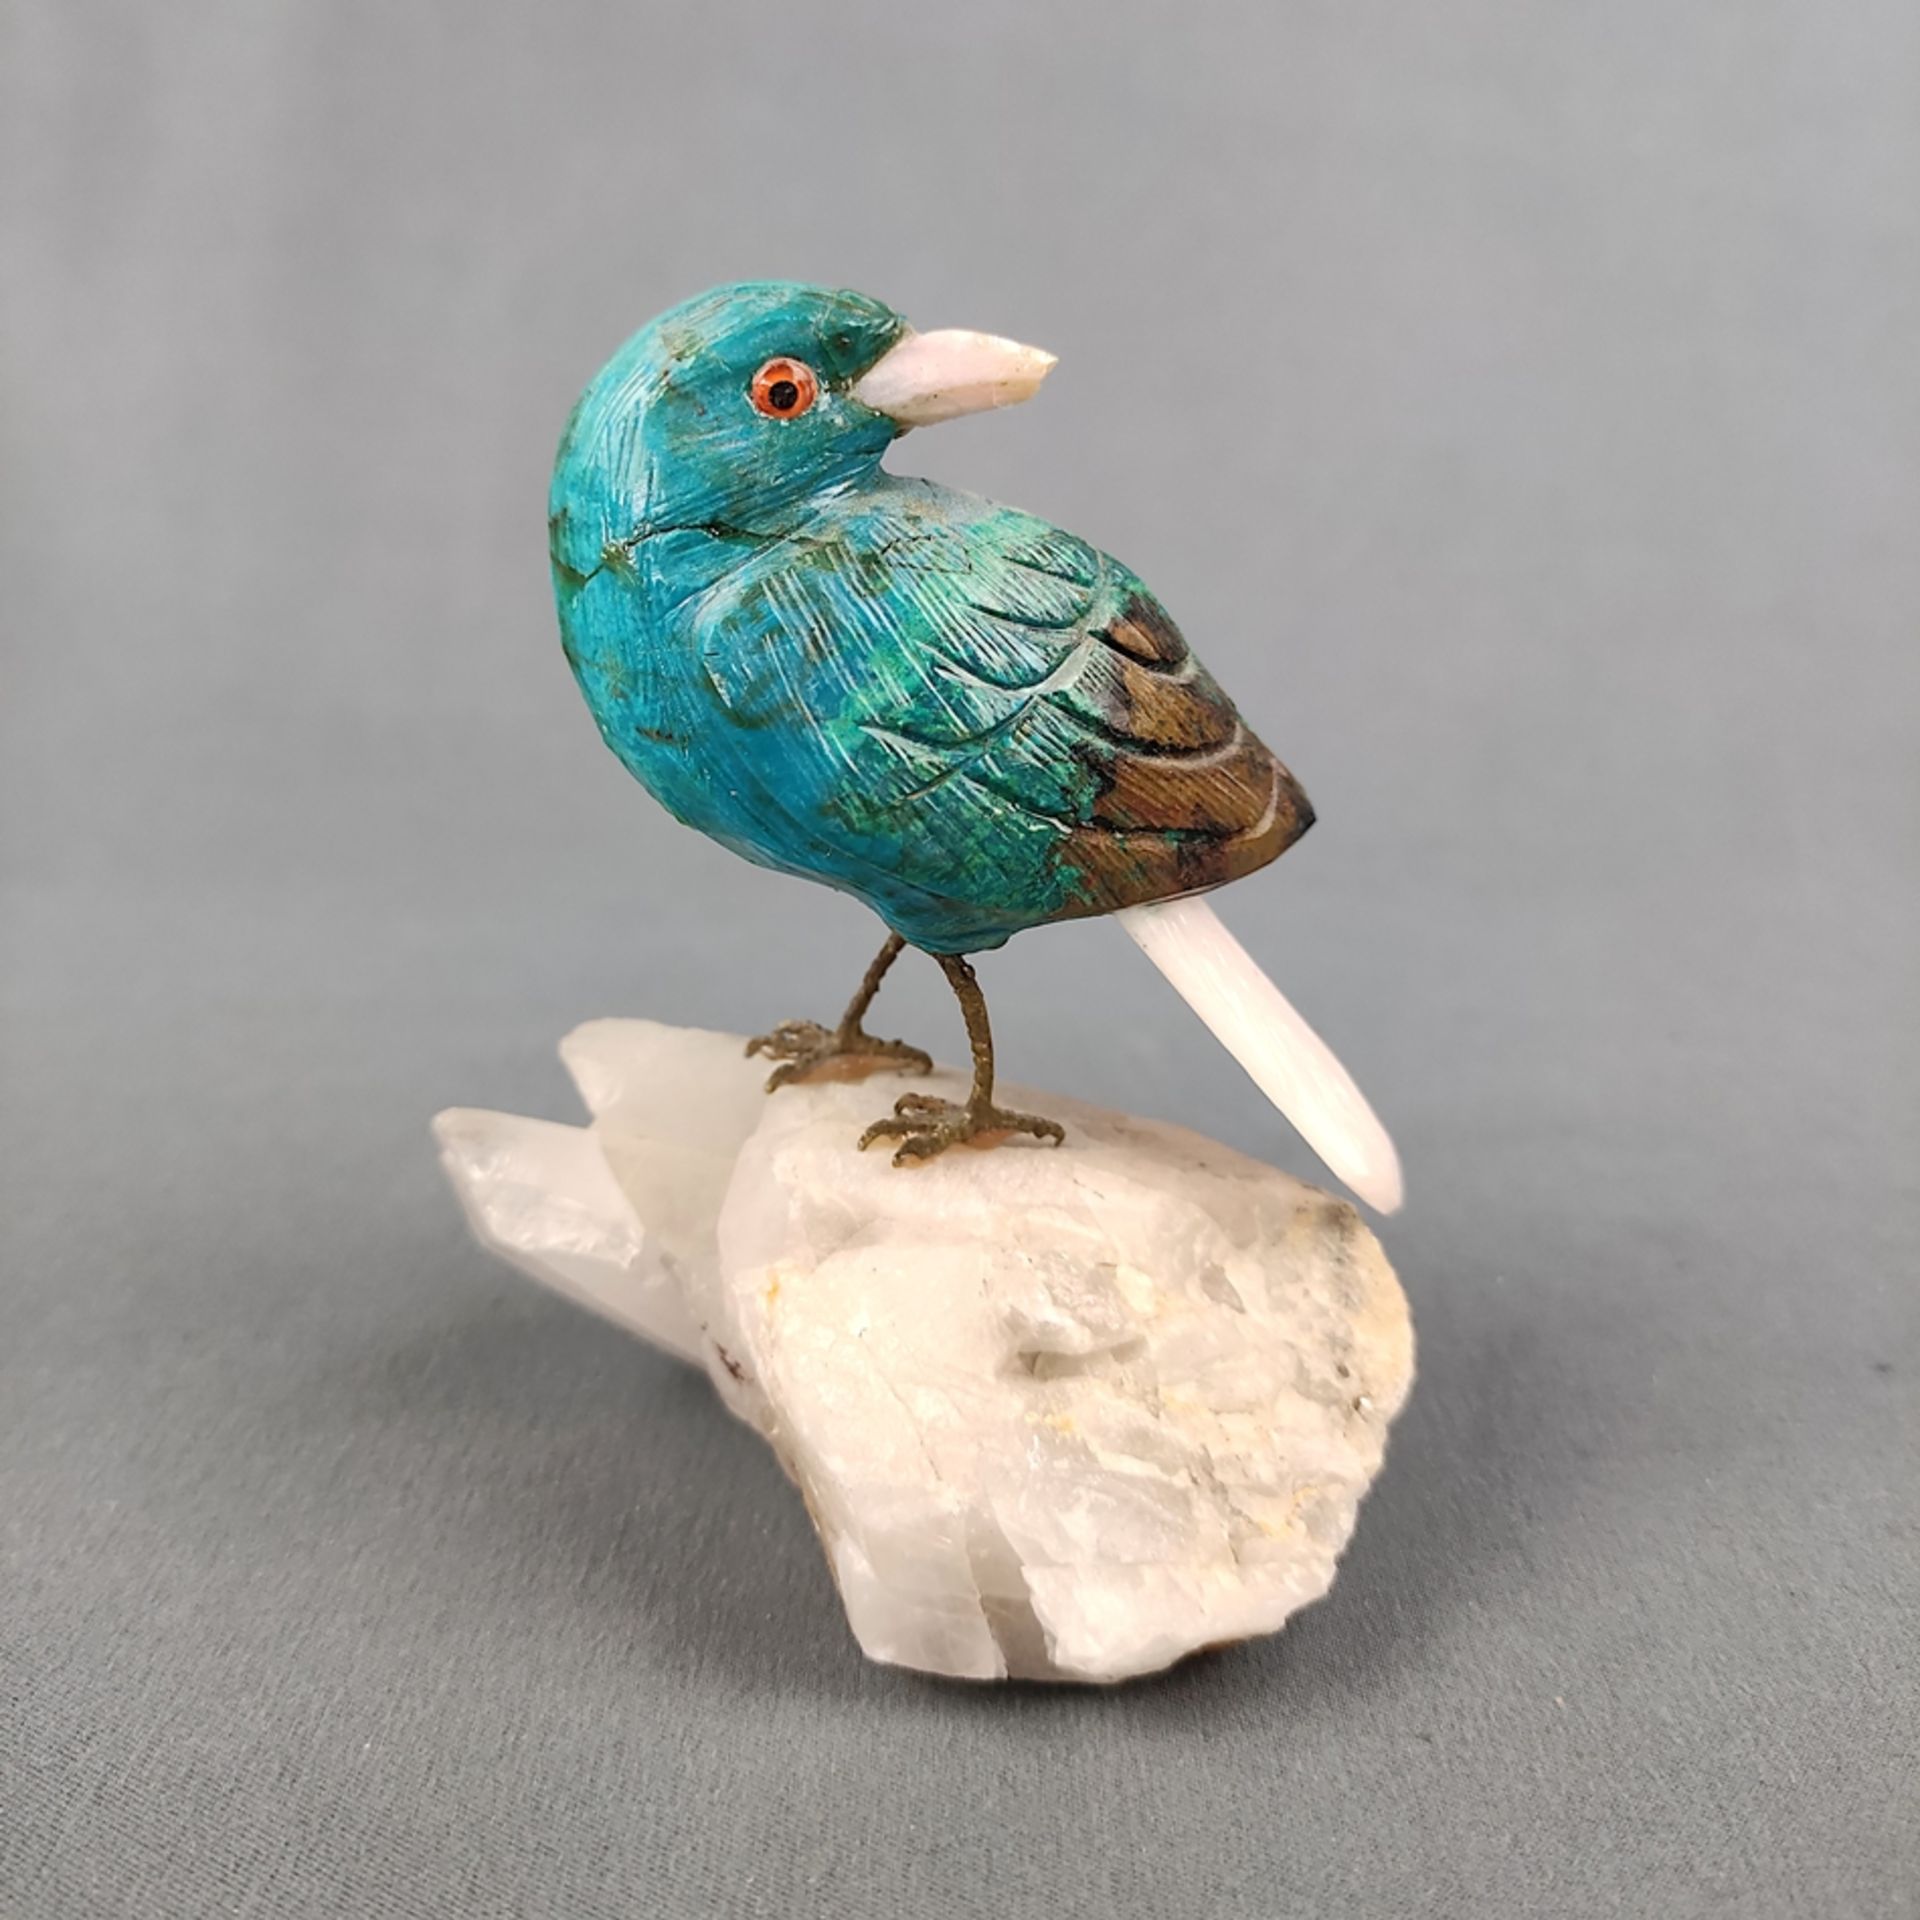 3 birds made of semi-precious stones, consisting of "toucan" sitting on rock crystal, height 6.5cm, - Image 4 of 7